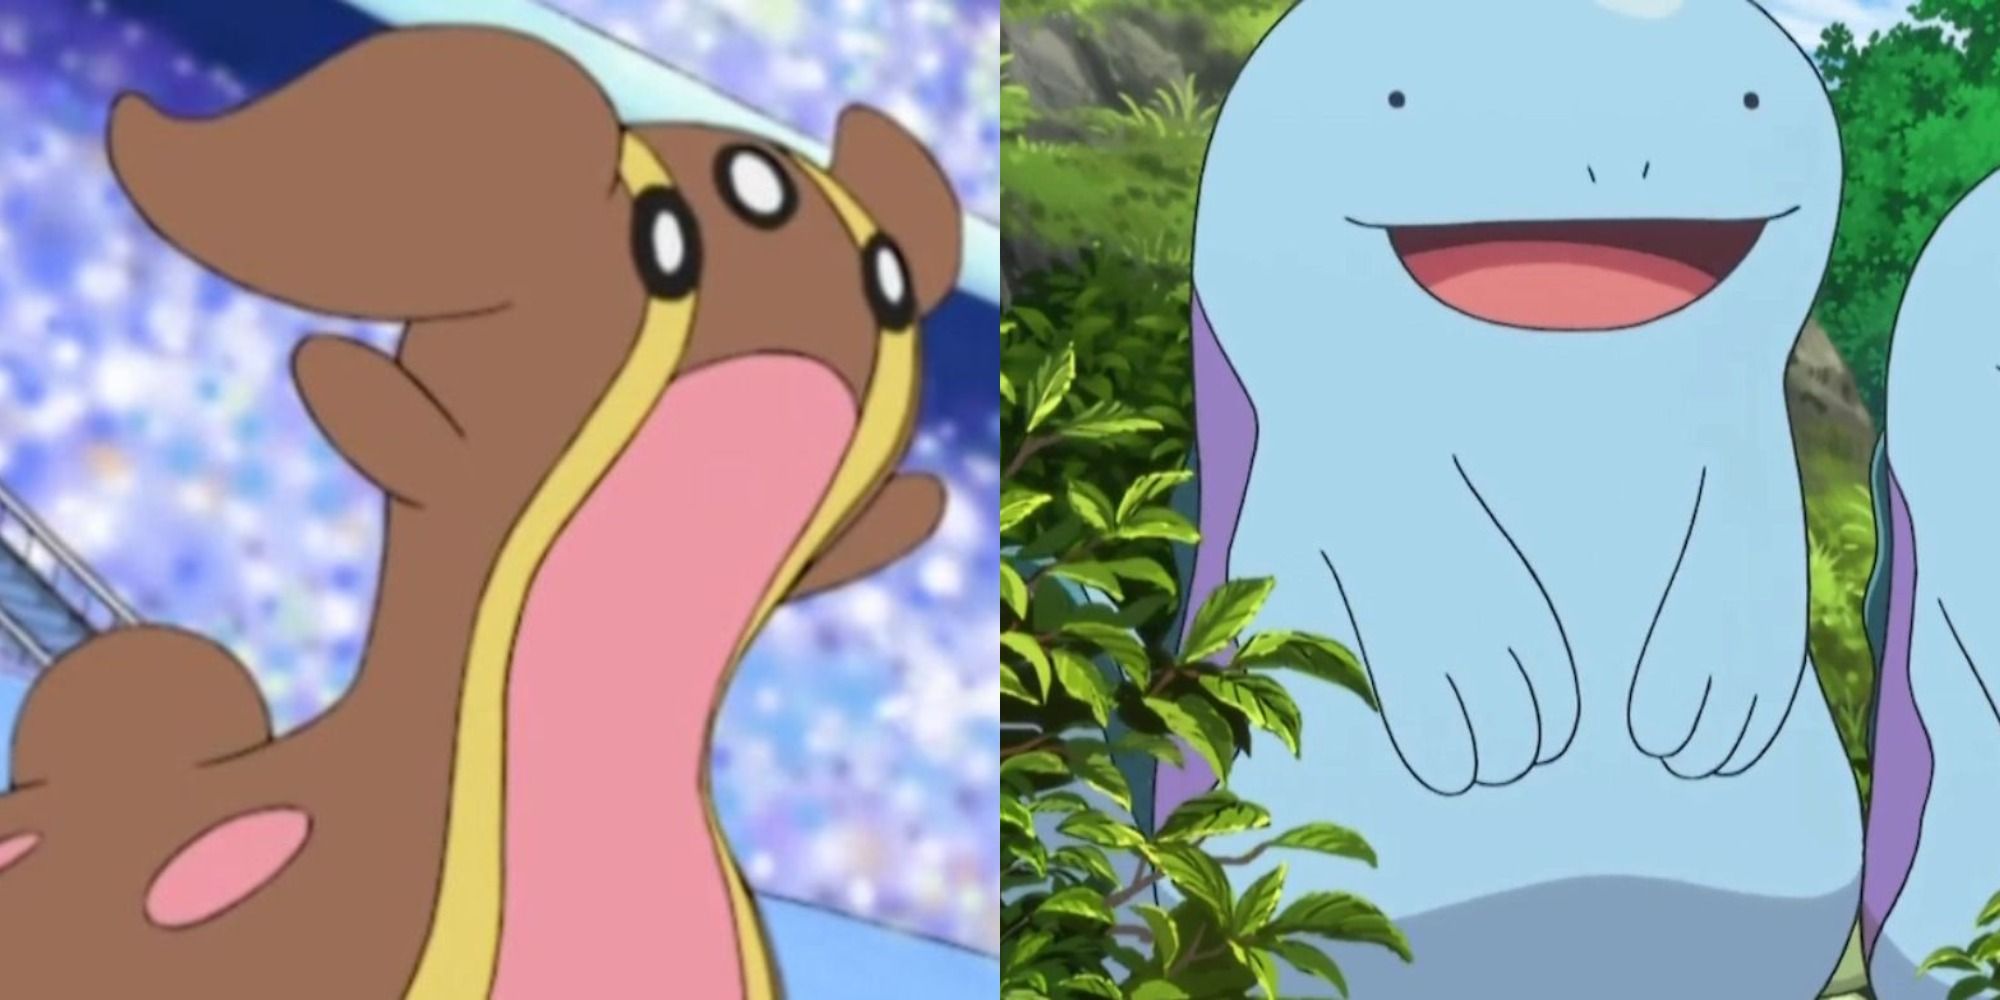 Pokemon Pink gastrodon in a stadium, Quagsire in some bushes